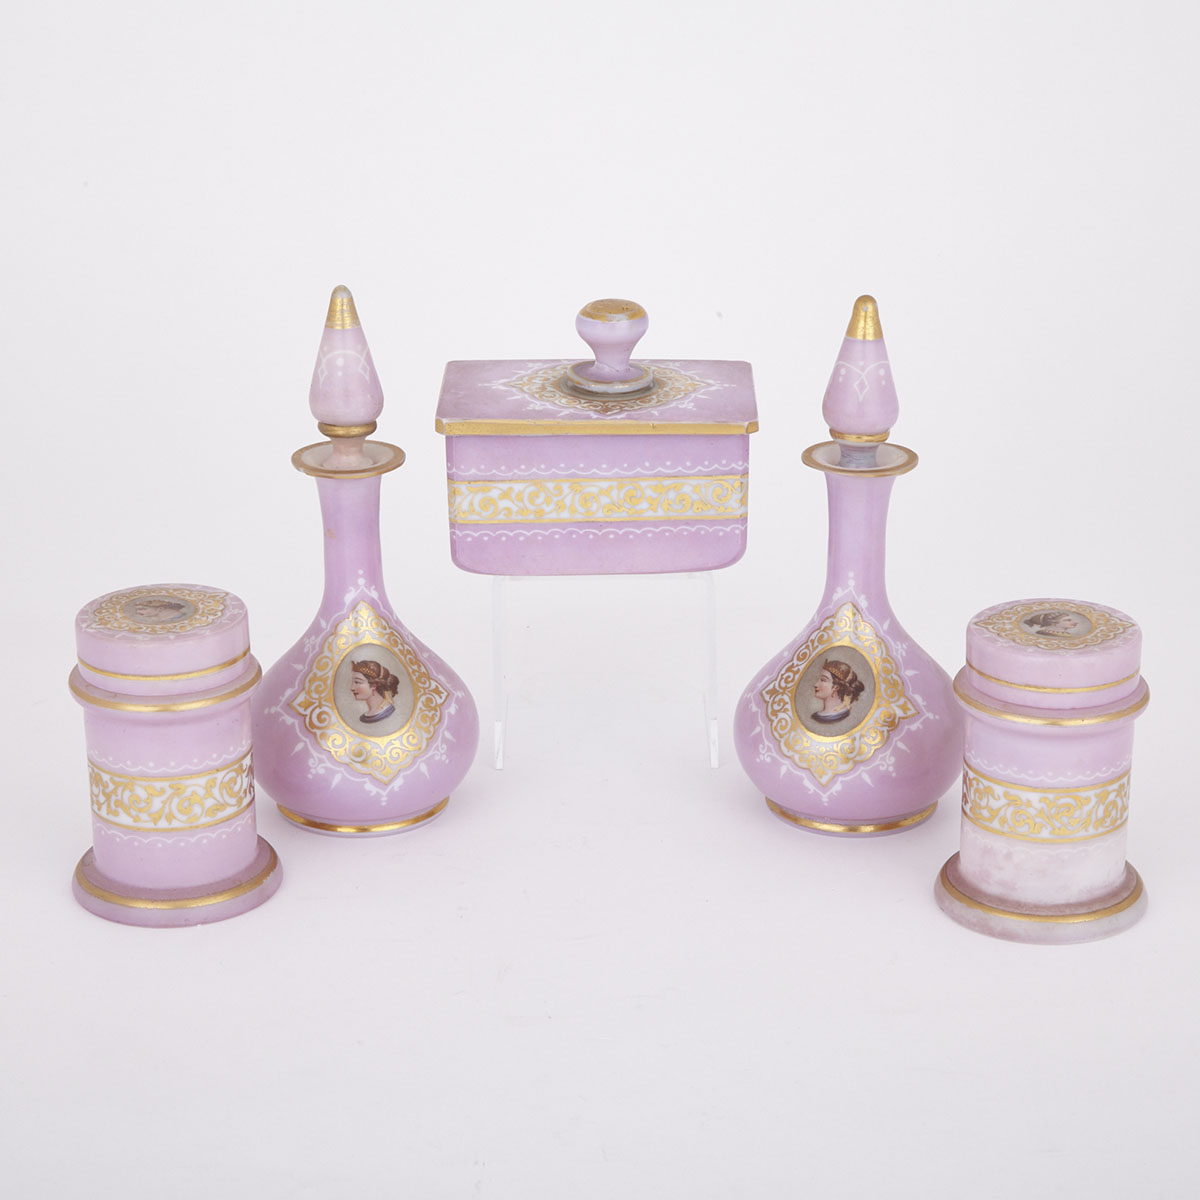 French Enameled and Gilt Pink Ground Opaque White Glass Dressing Table Set, late 19th century